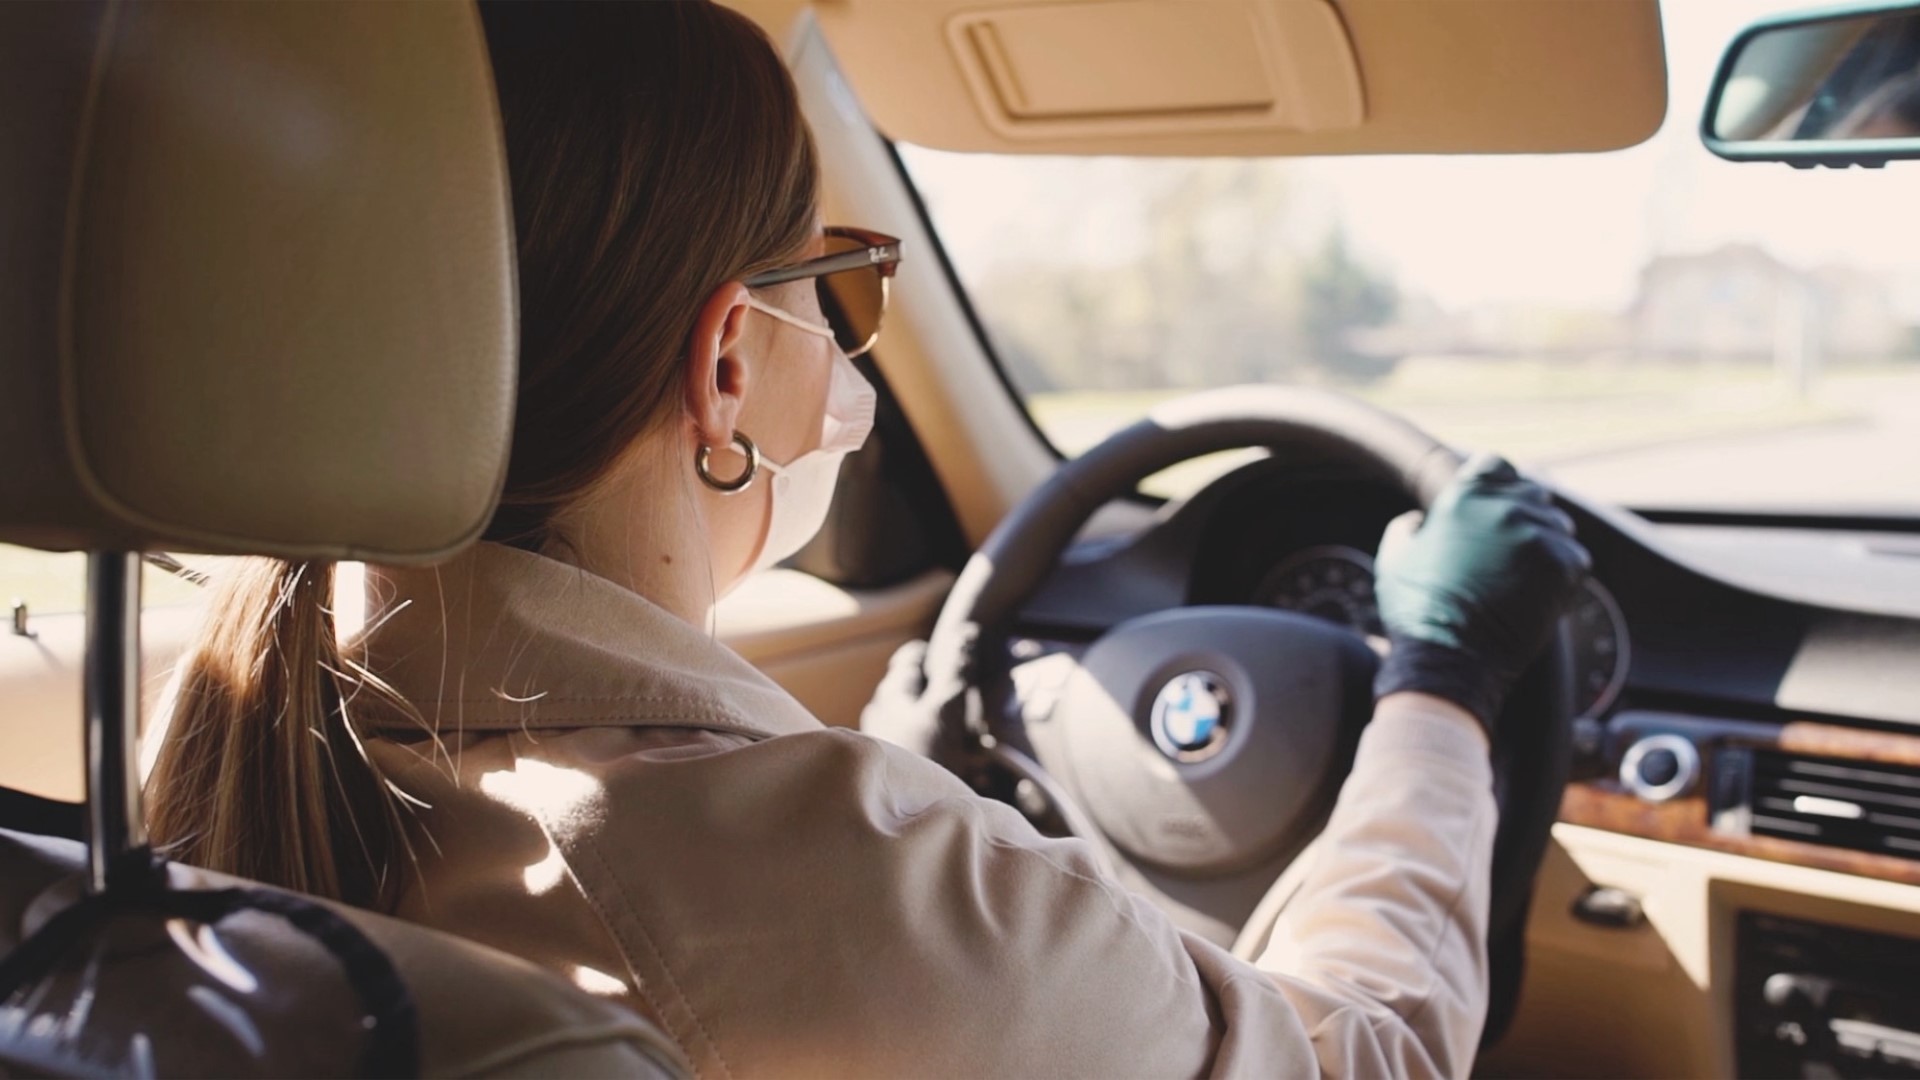 A new study conducted by OnePoll on behalf of Hyundai found that these are some of the most common bad habits among drivers in America. Buzz60's Johana Restrepo has more.